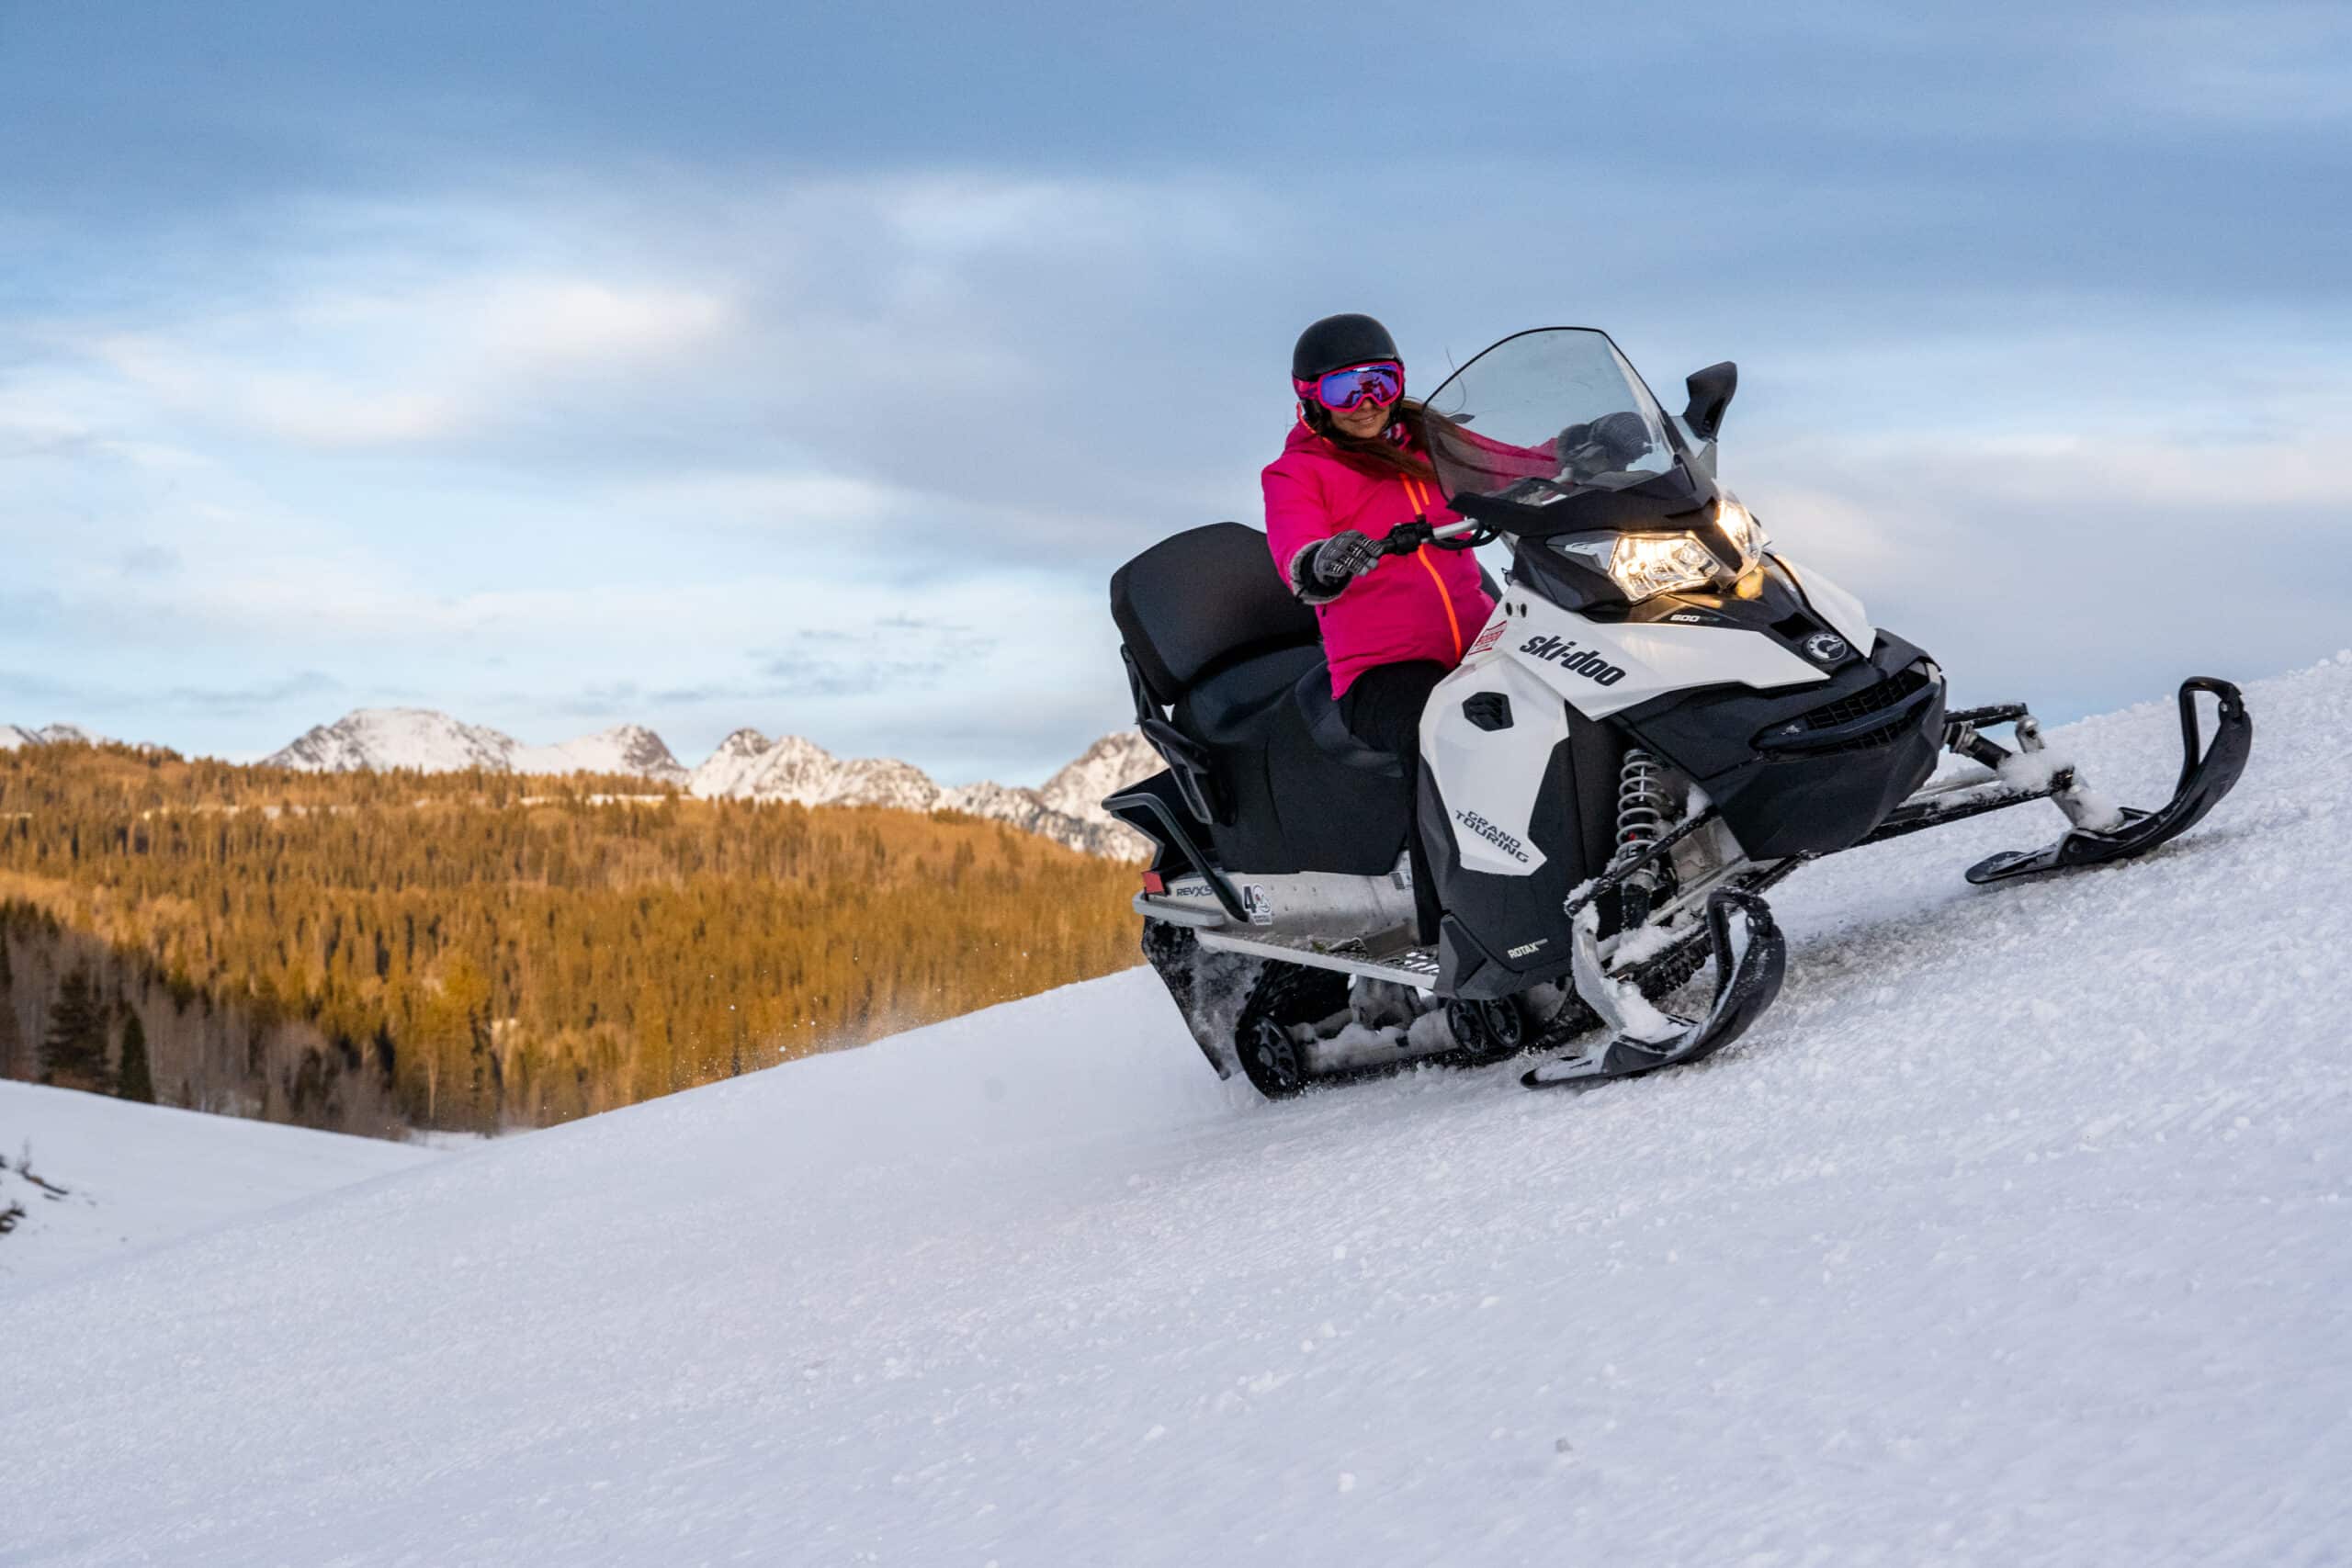 Female rider smiles as she takes a huge bank turn on a guided snowmobile tour